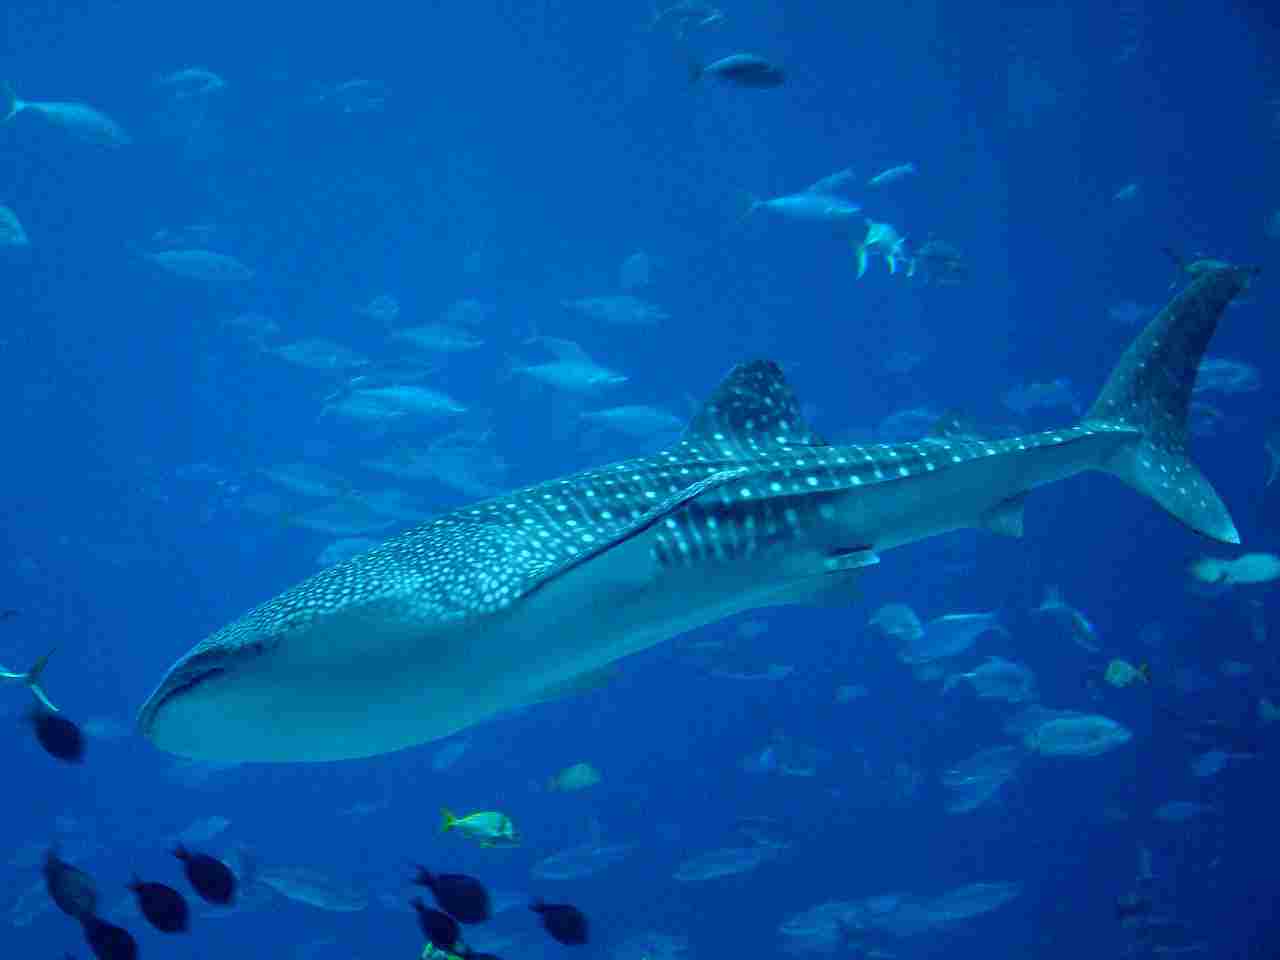 Is a Fish a Consumer: Large Fish like whale Sharks can be Classified as Quaternary Consumers (Credit: istolethetv 2009 .CC BY 2.0.)